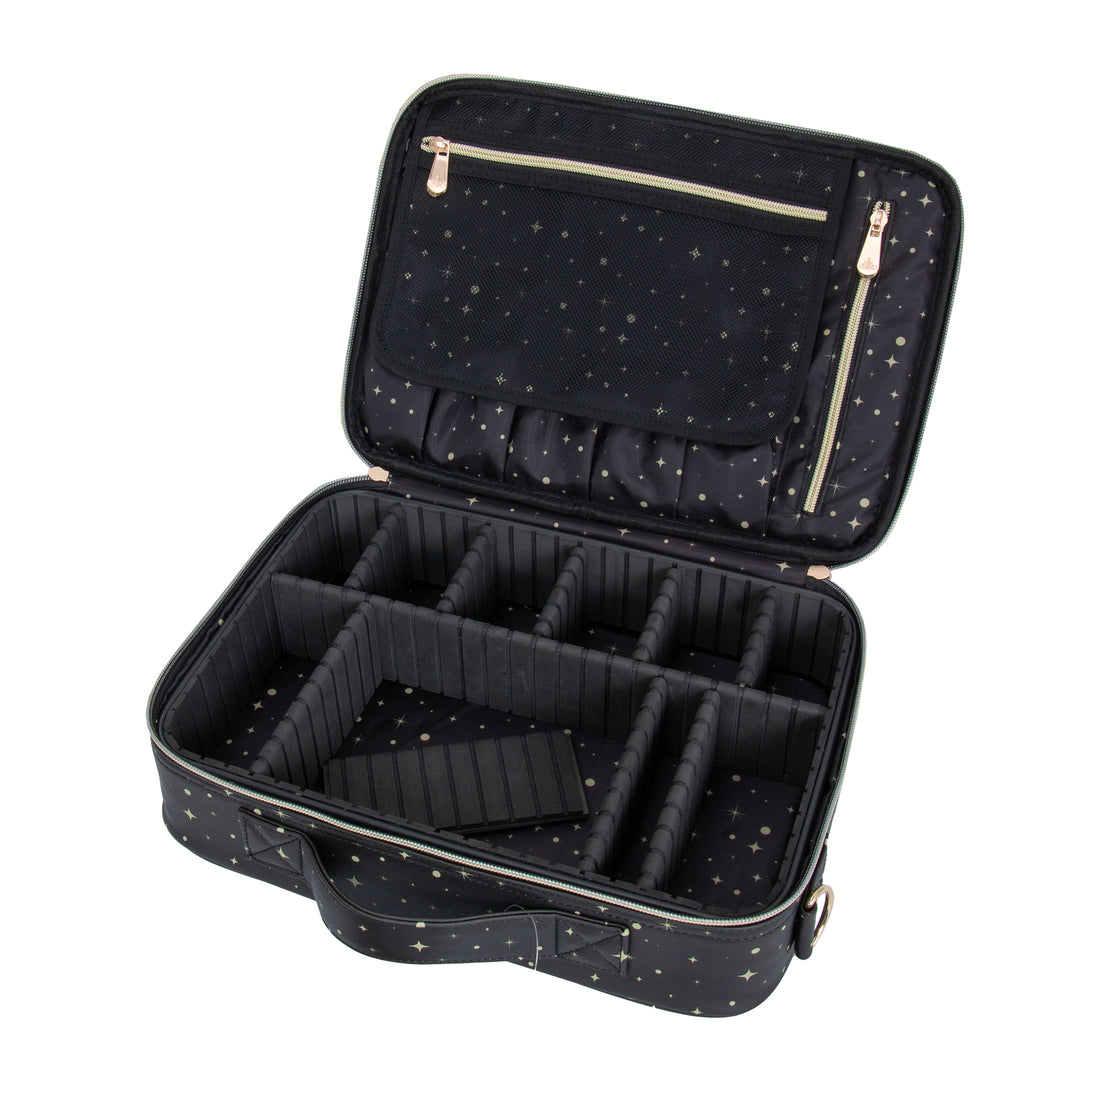 Princess "Midnight" Makeup Carry Case with Adjustable Dividers